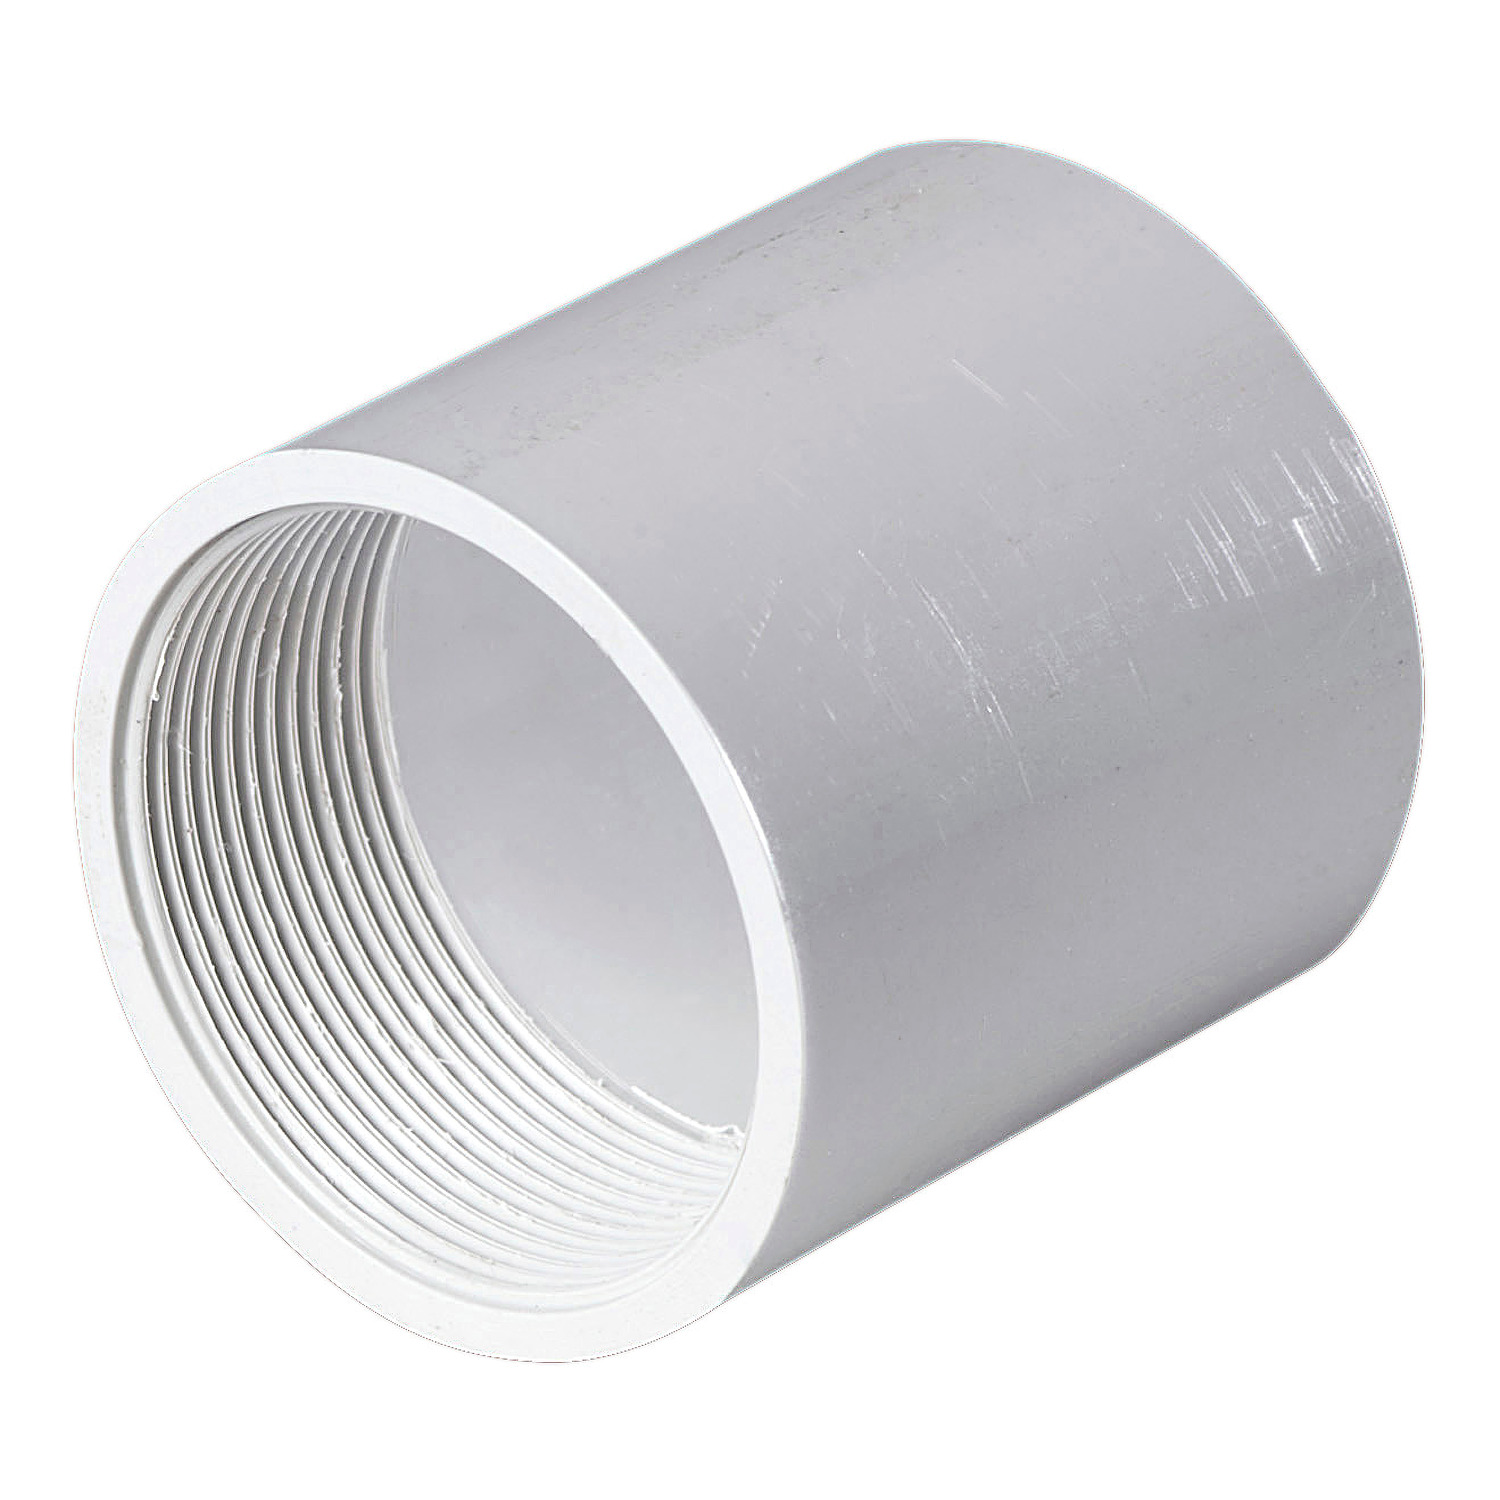 Solid Fittings - PVC, Plain To Screwed Couplings, 40mm, Grey